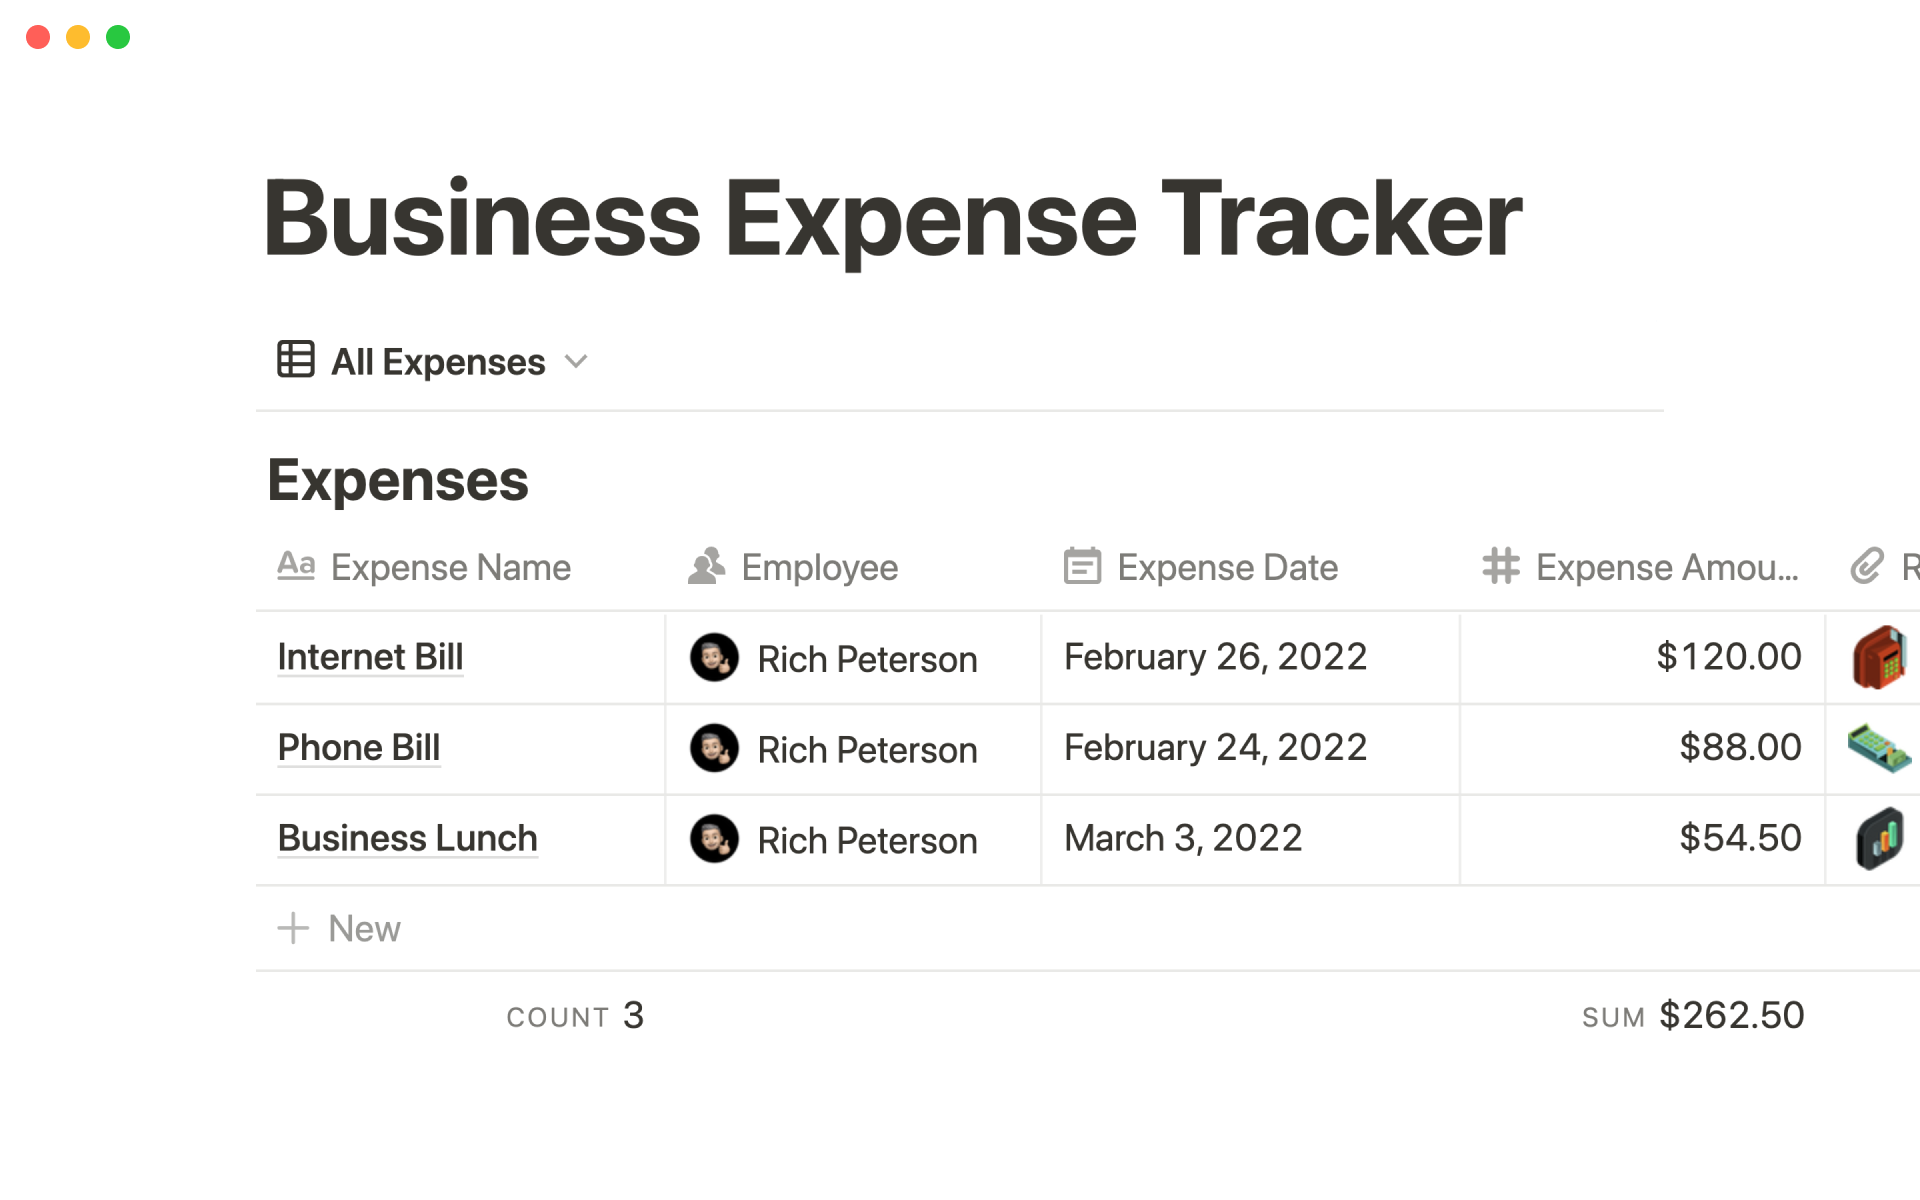 Organize your business expenses in one place.